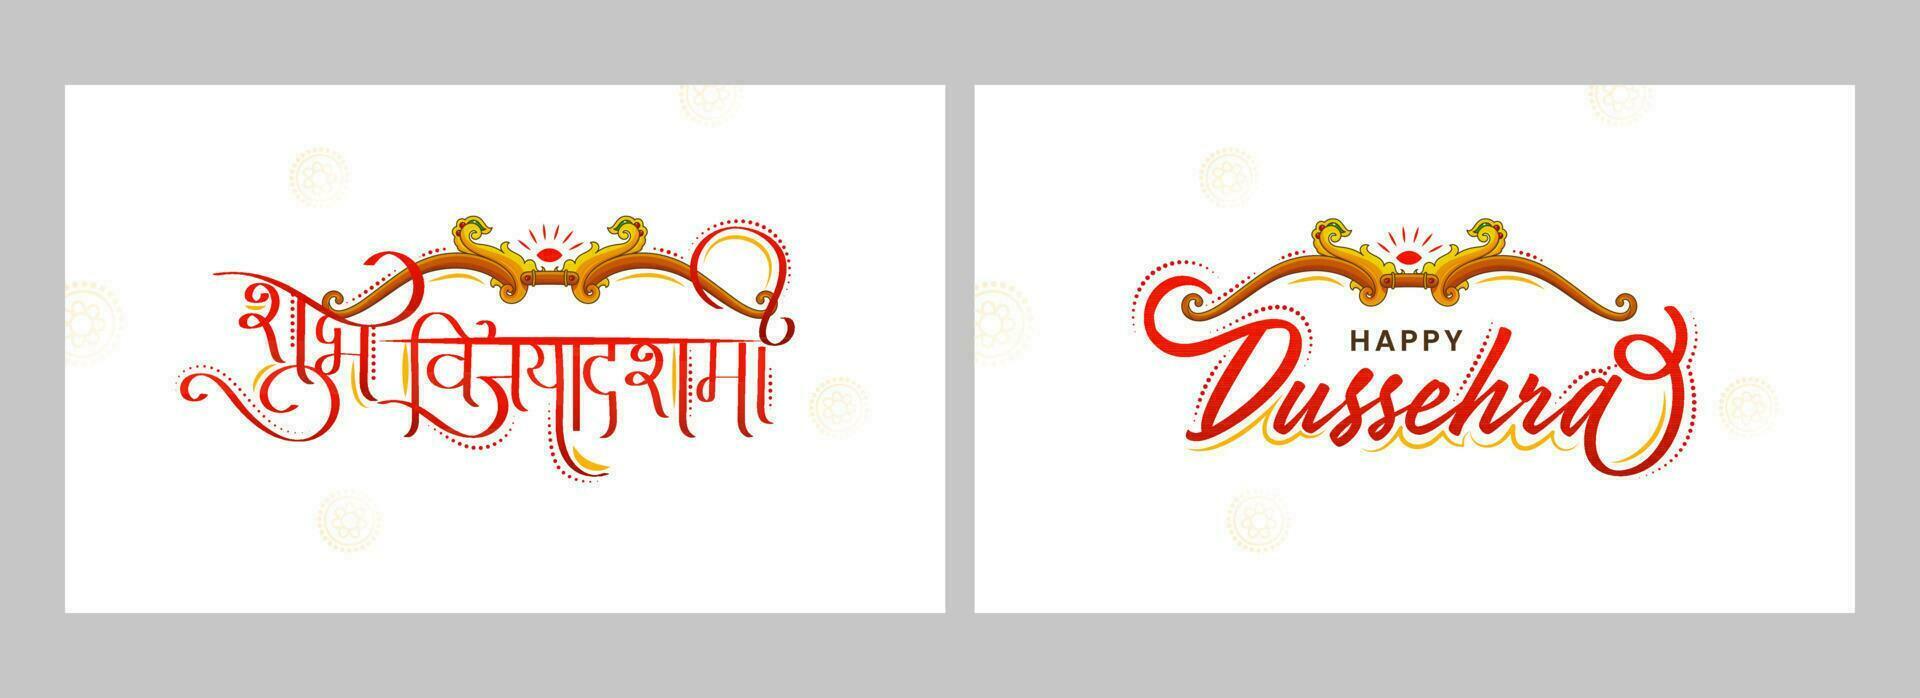 Happy Dussehra Vijayadashami Calligraphy With Bow Arrow Illustration On White Background In Two Options. vector